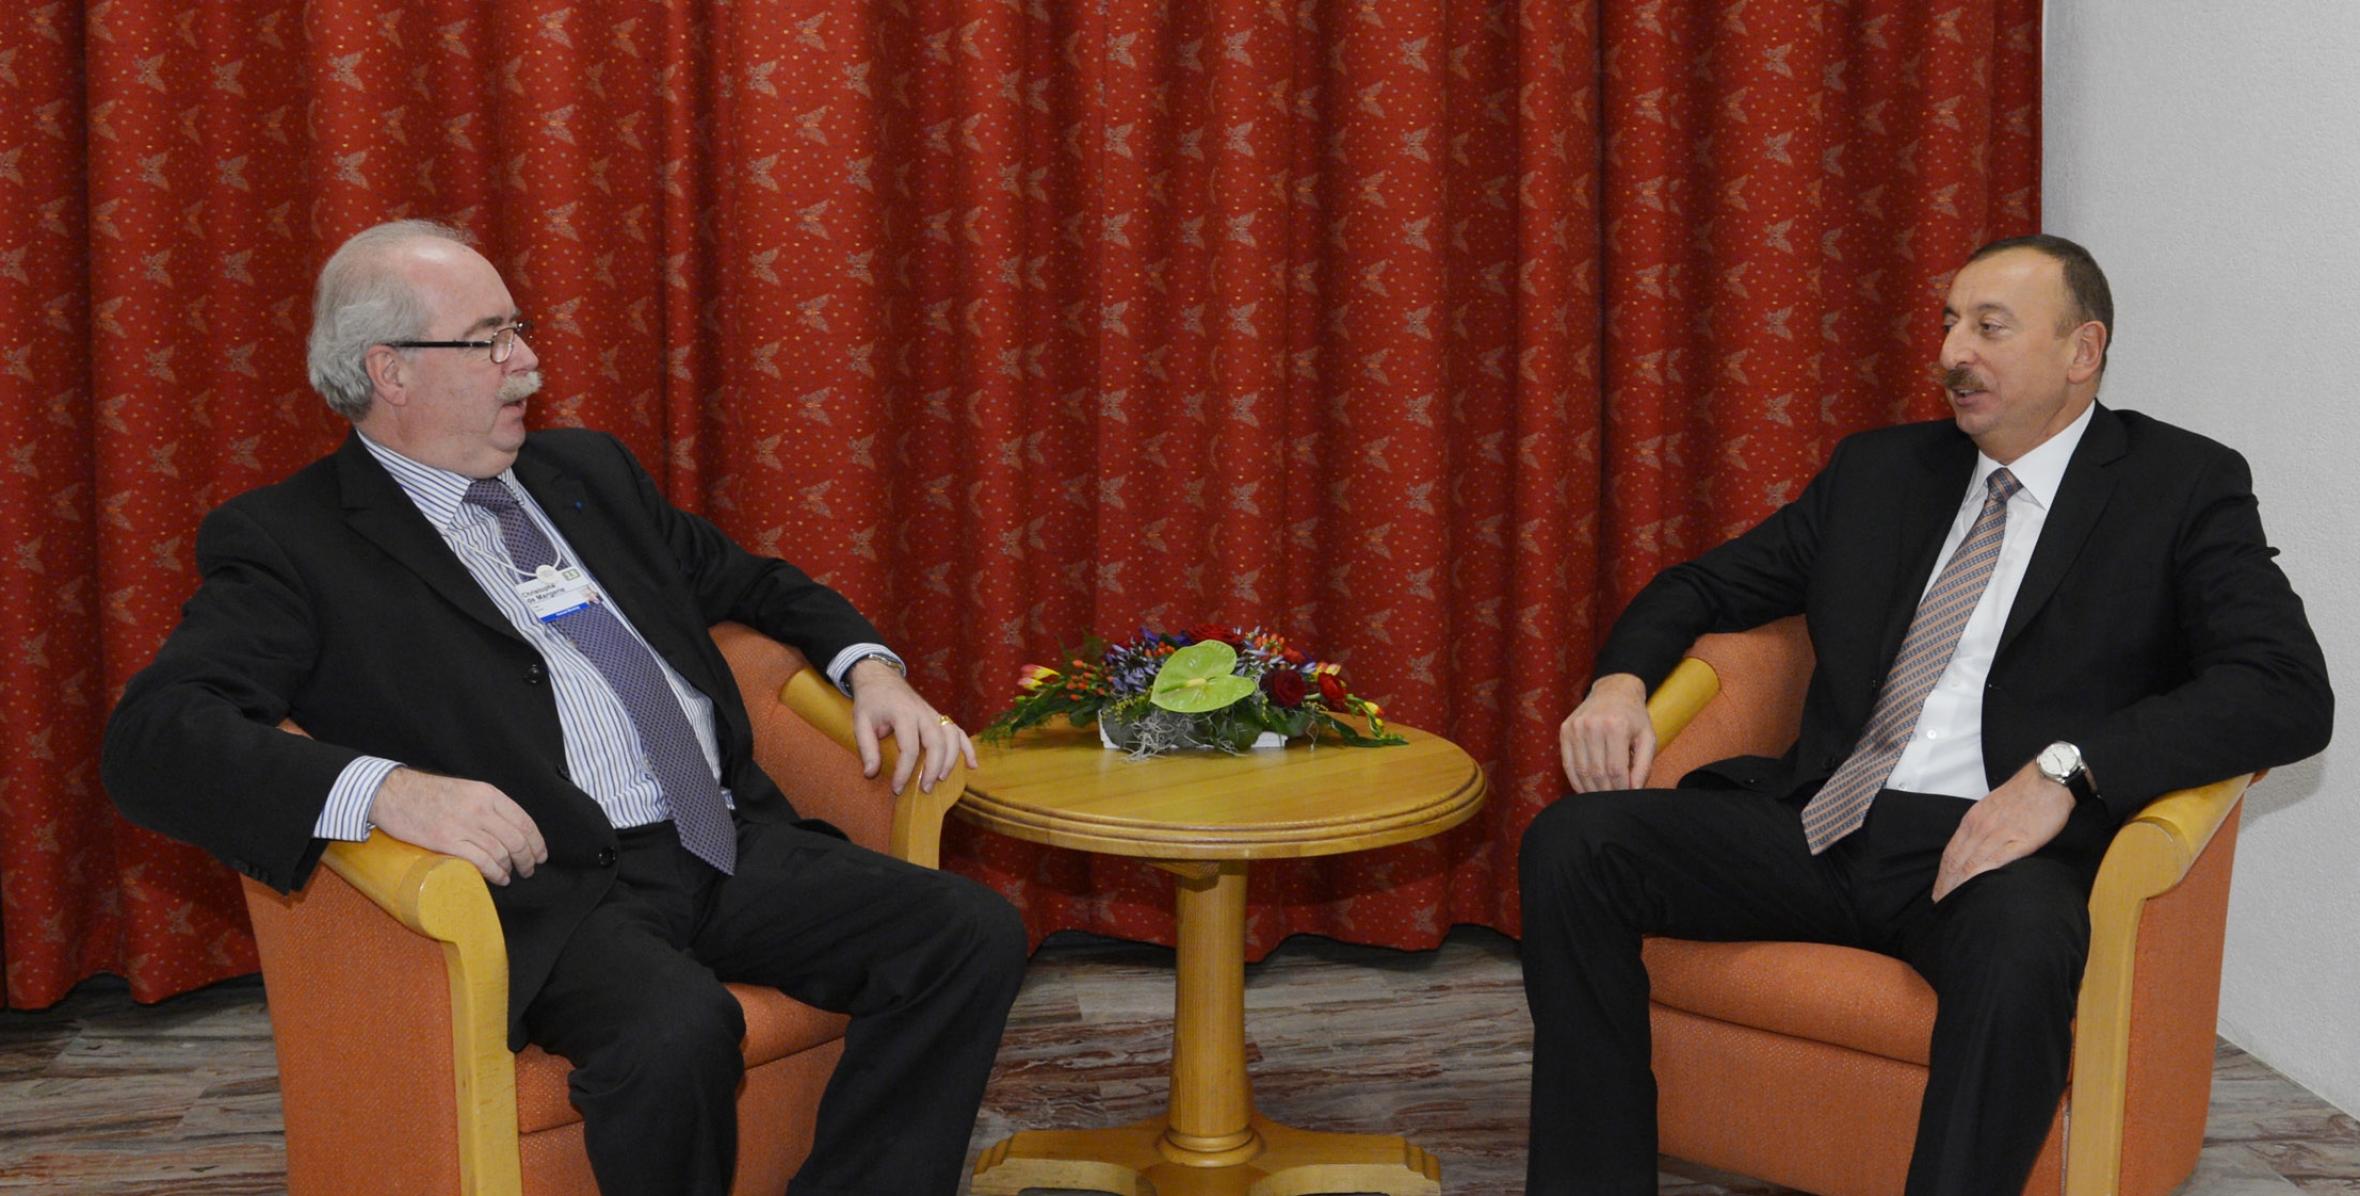 Ilham Aliyev met with Total Chief Executive Christophe de Margerie